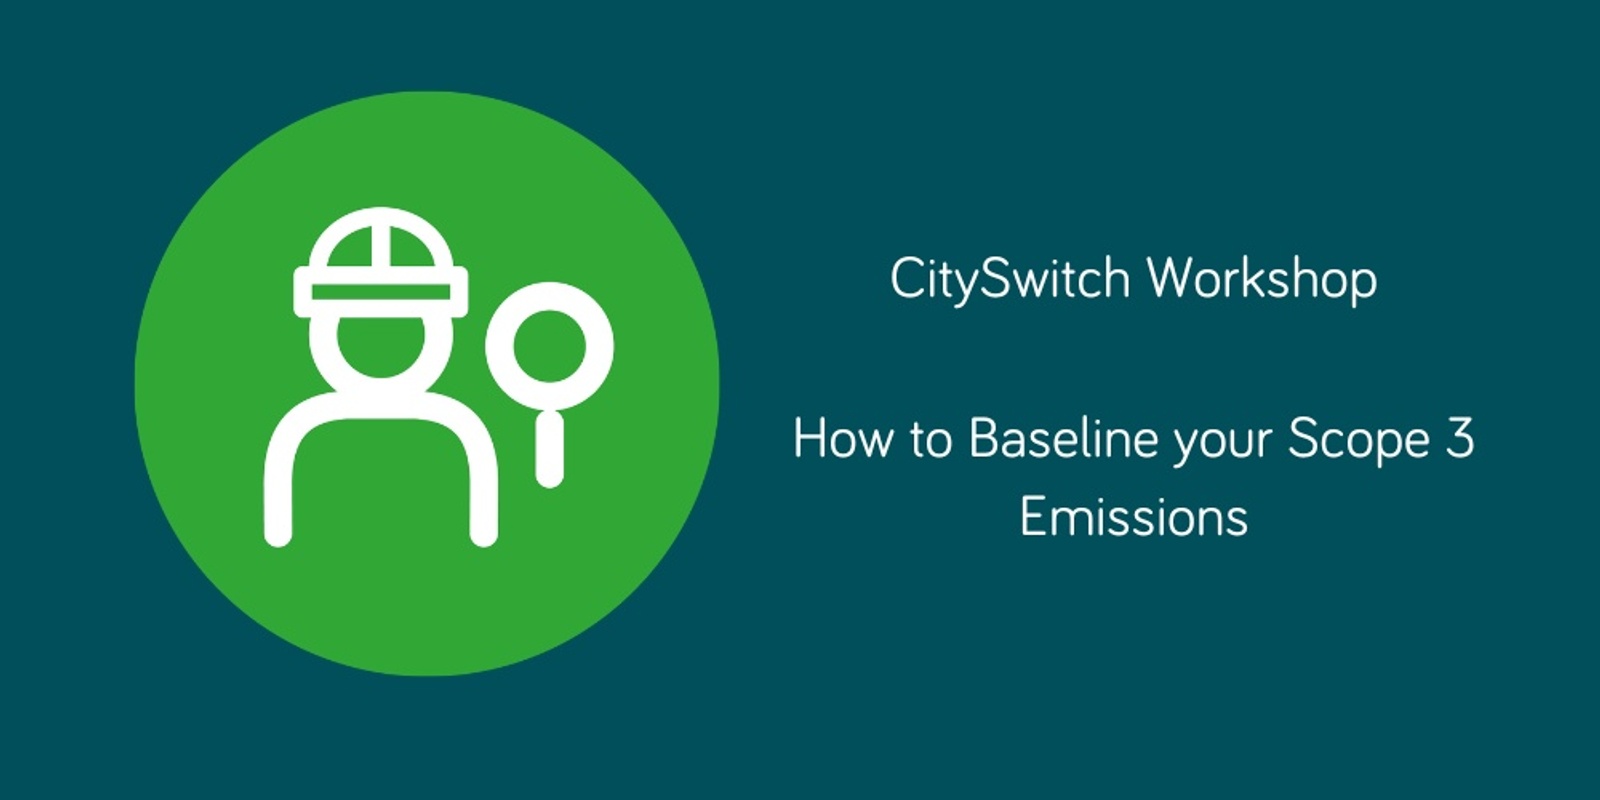 CitySwitch workshop - How to Baseline your Scope 3 Emissions